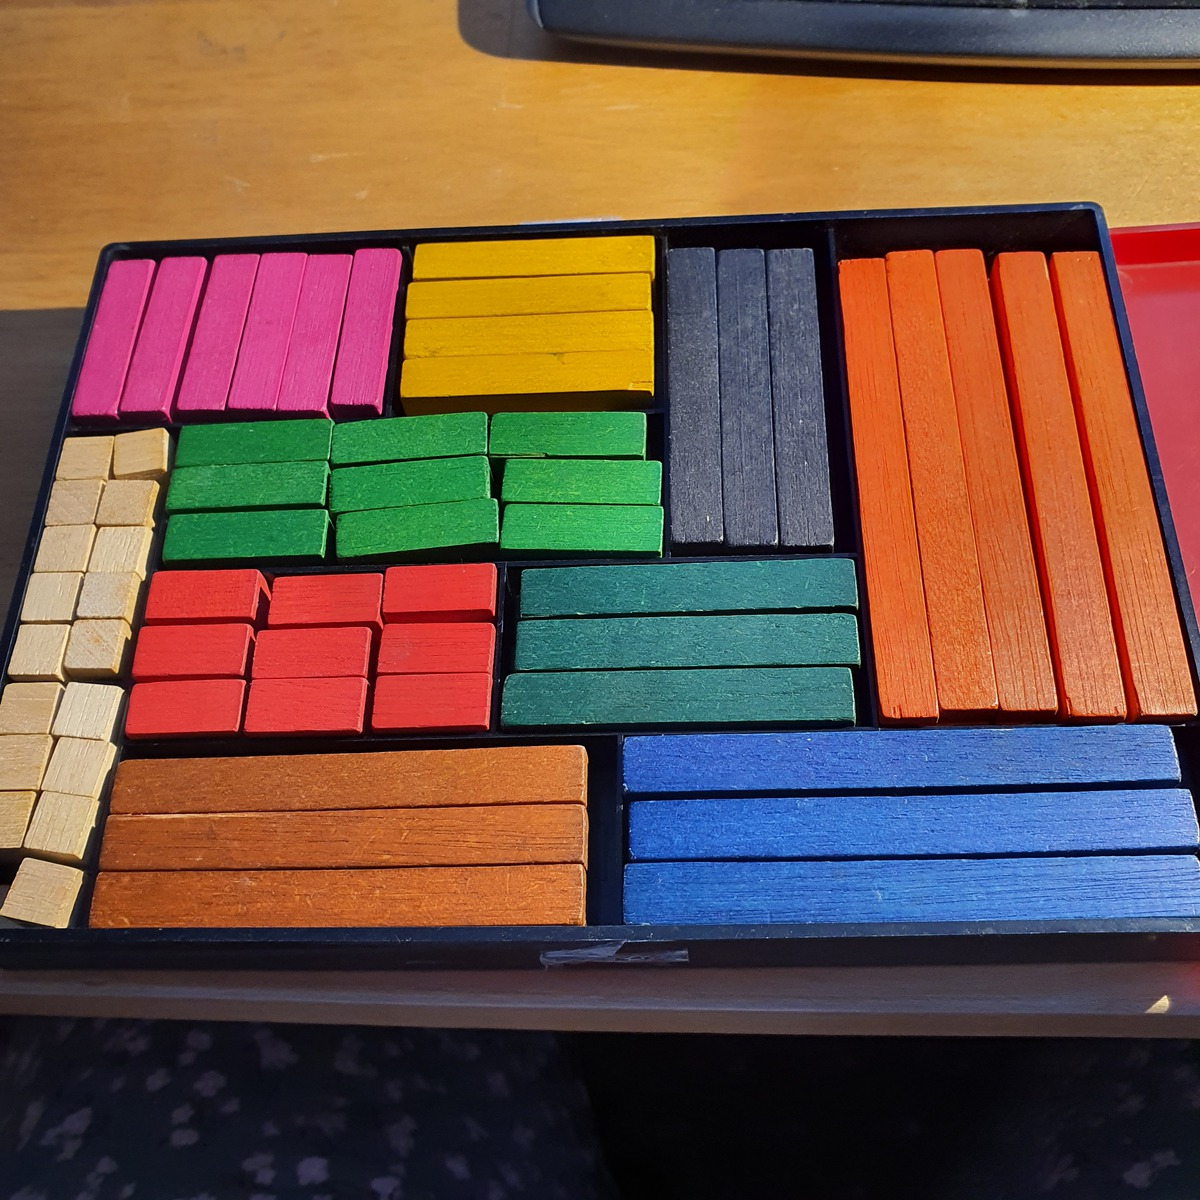 Which manipulatives? Check any of the manipulatives that you have heard of: